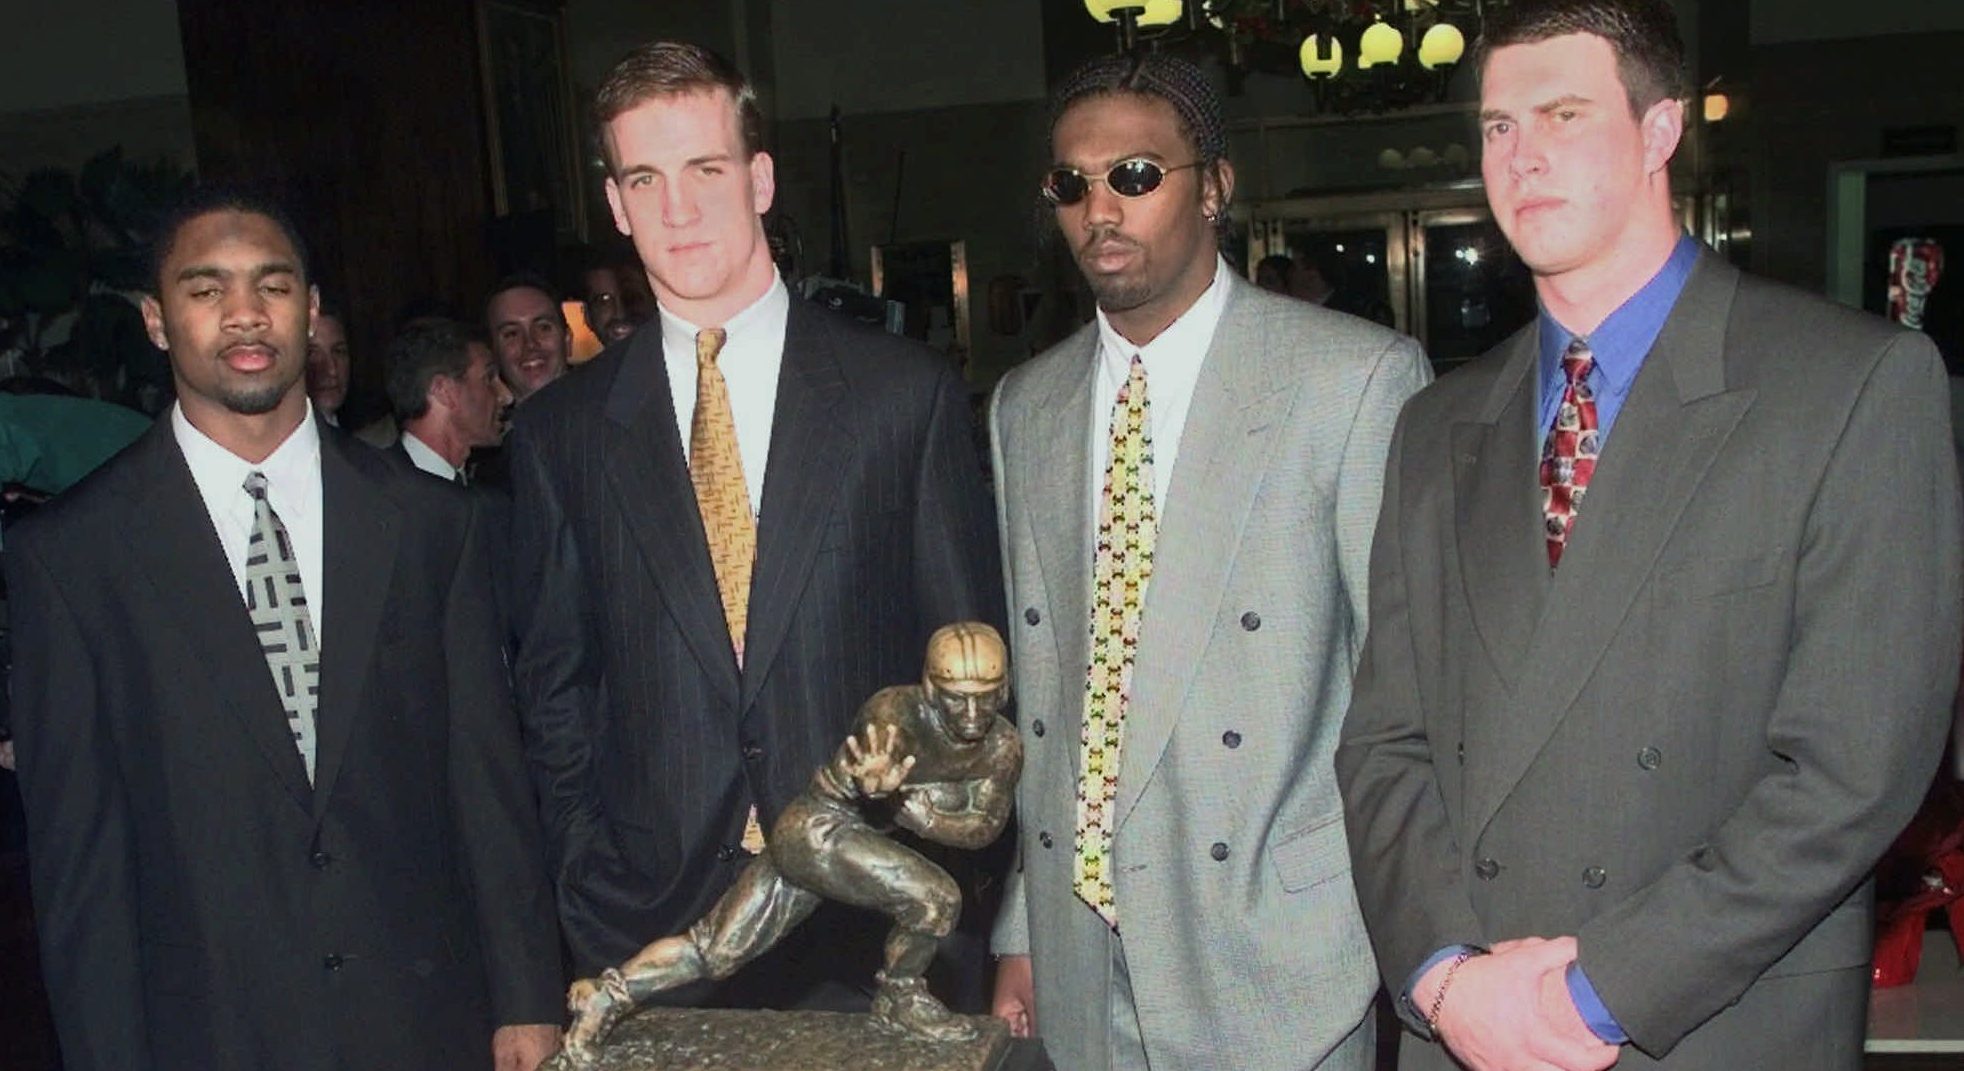 Heisman Trophy candidates, from left to right, Michigan's Charles Woodson, Tennessee's Peyton Manning, Marshall's Randy Moss and Washington States's Ryan Leaf pose in the lobby of the Downtown Athletic Club with the Heisman trophy prior to the start of the ceremony Saturday, Dec. 13, 1997, in New York. (AP Photo/Adam Nadel)